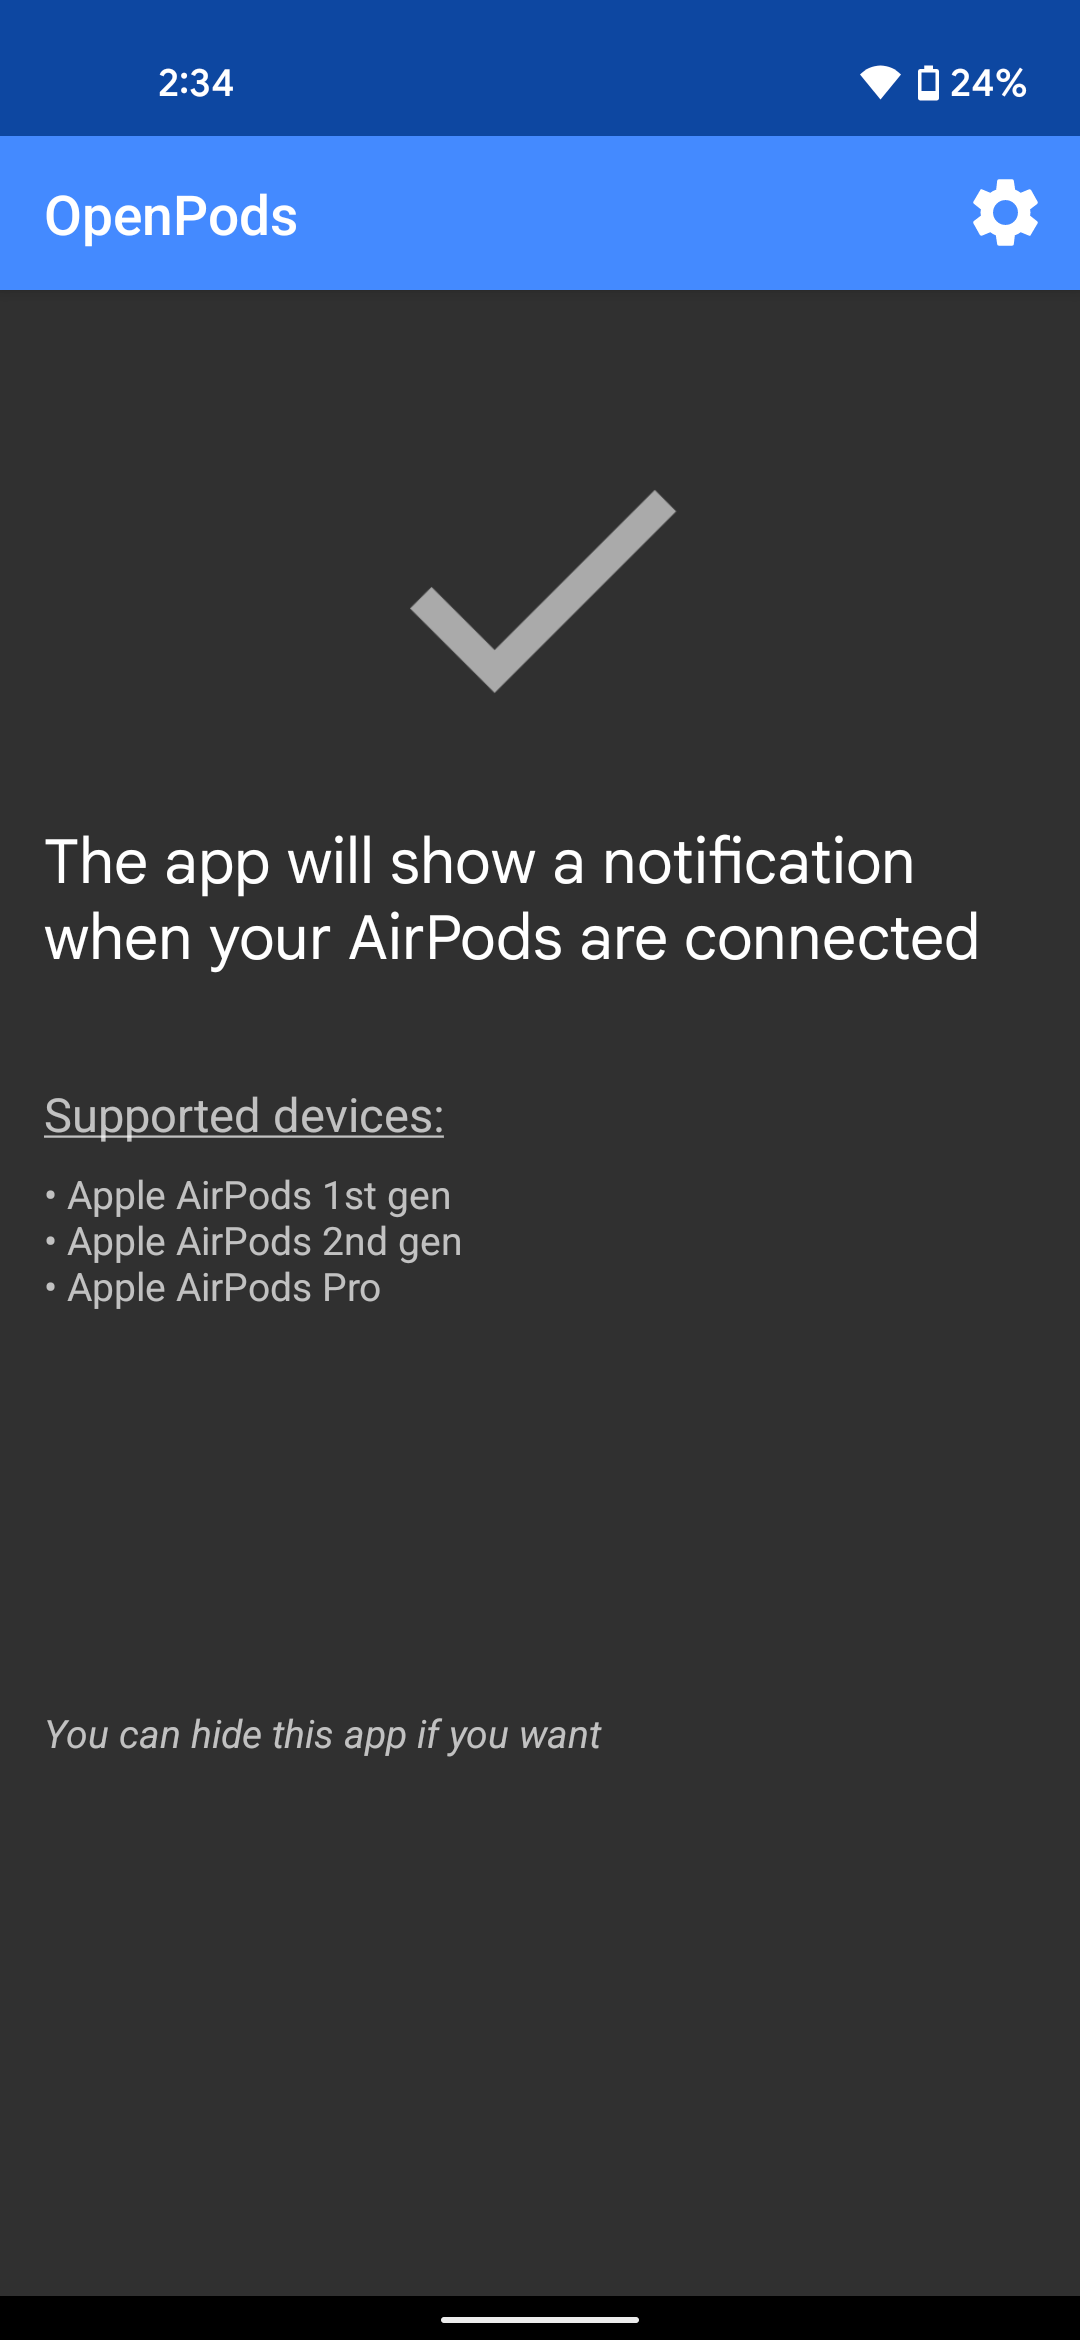 Open Pods says it wiil show a notification when AirPods are connected